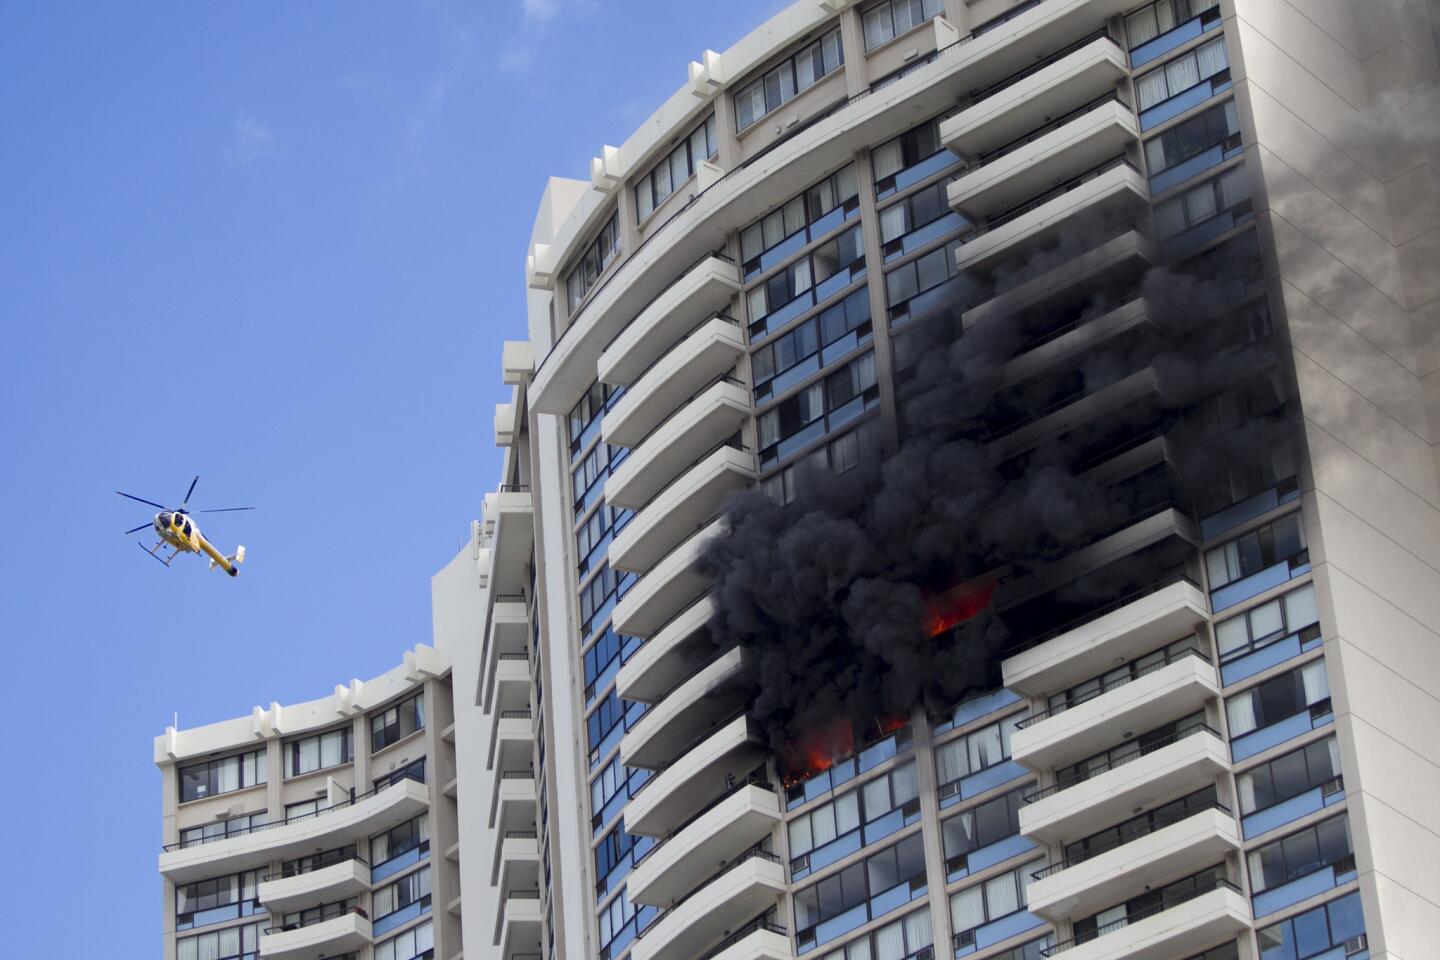 A Honolulu Fire Dept. helicopter flies near the burning Marco Polo apartment complex.